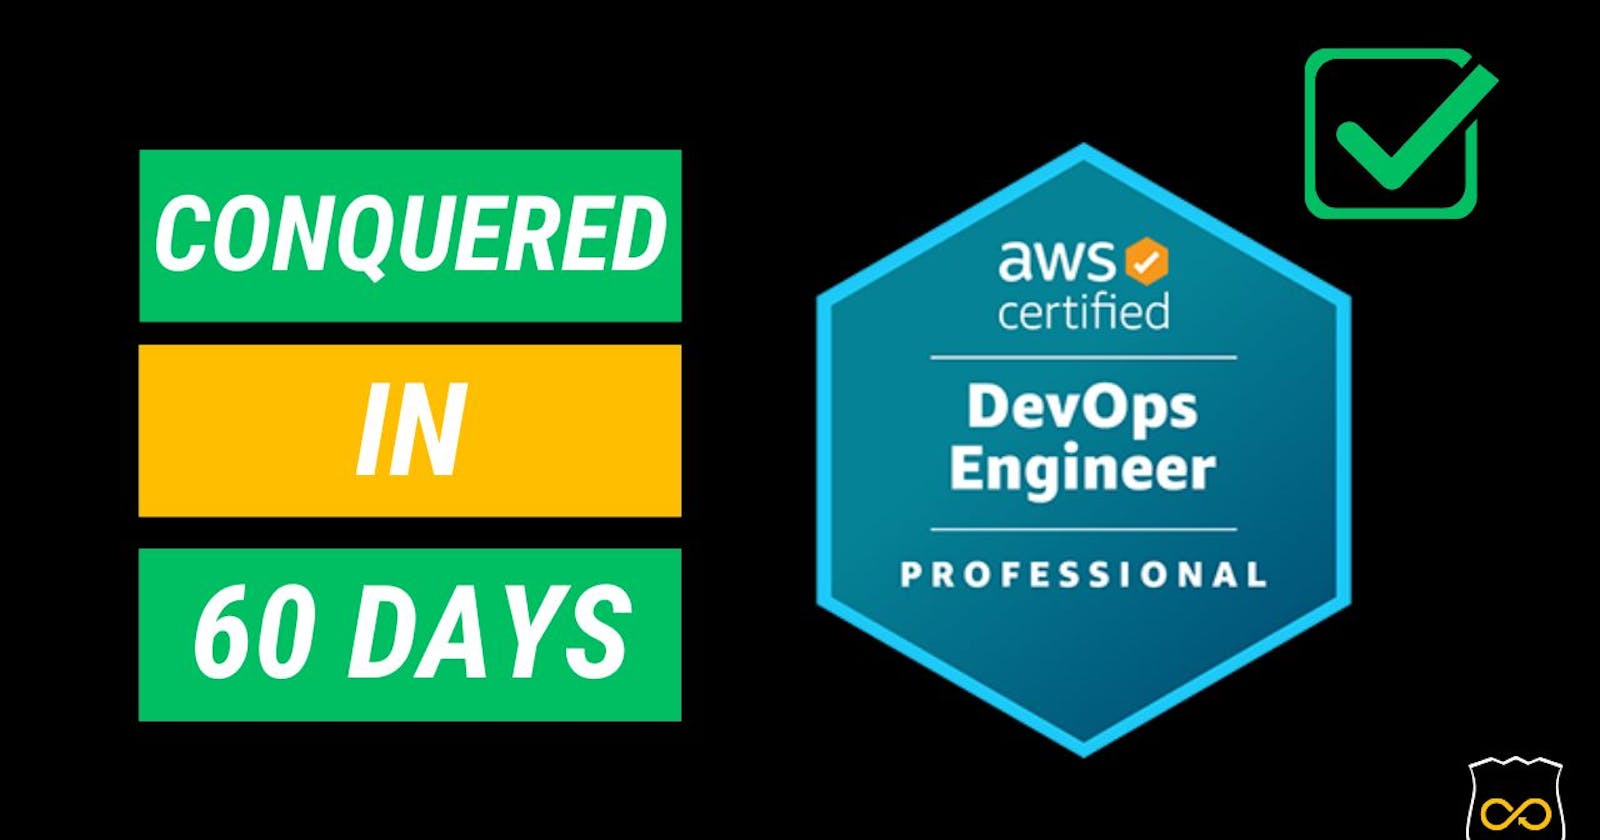 How I Conquered the AWS Certified DevOps Engineer Professional Exam in 60 Days